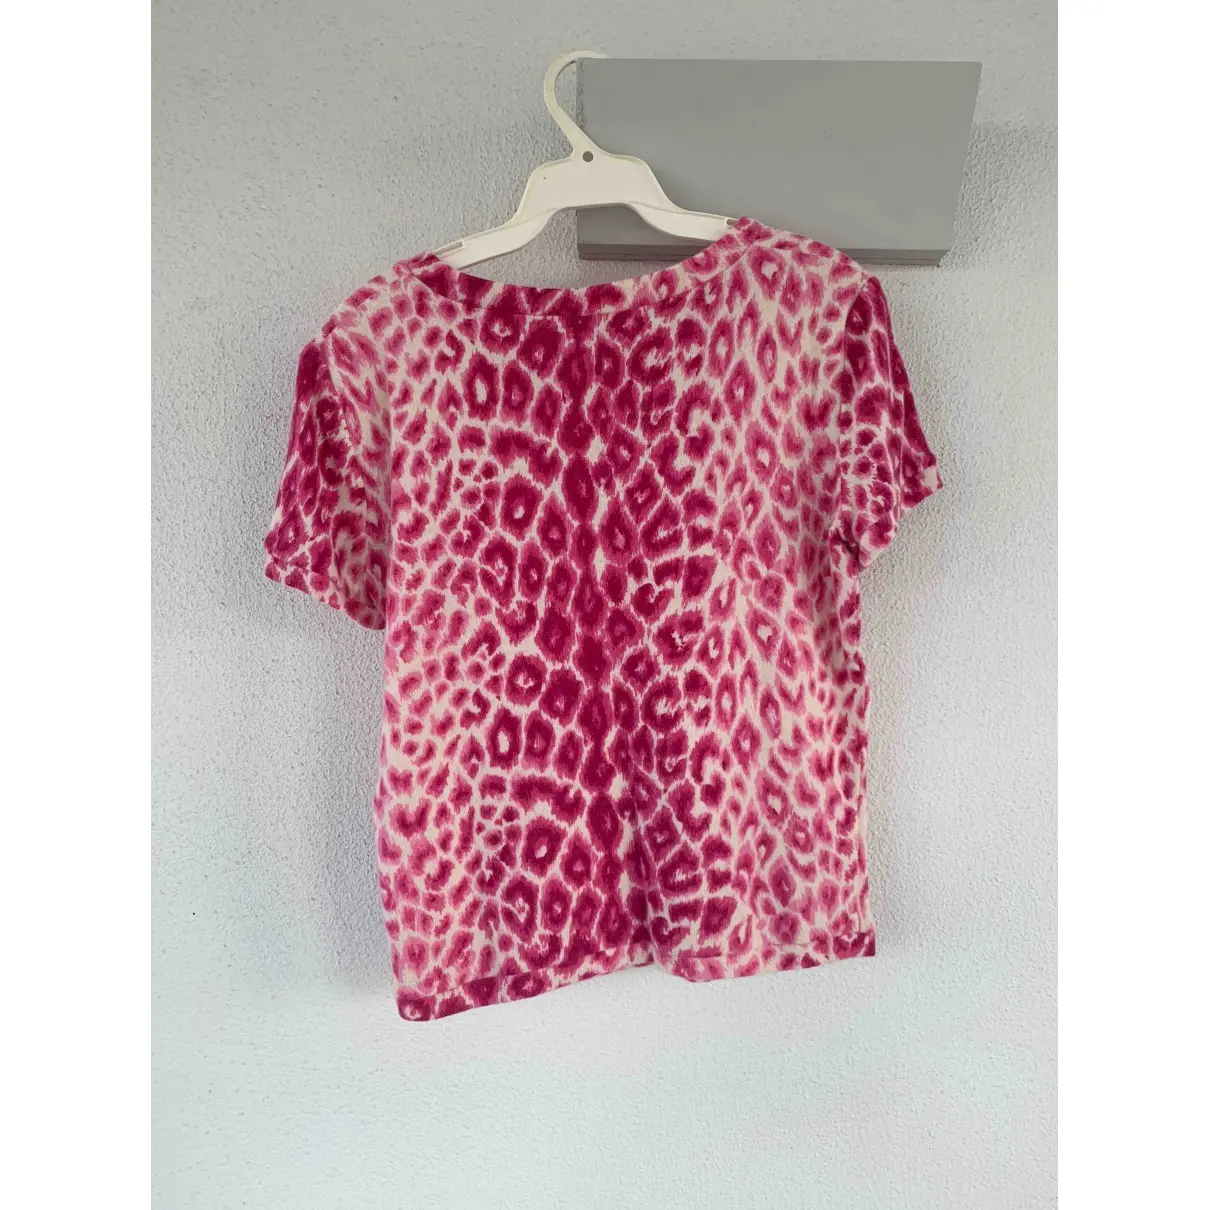 Moschino Cheap And Chic Wool t-shirt for sale - Vintage